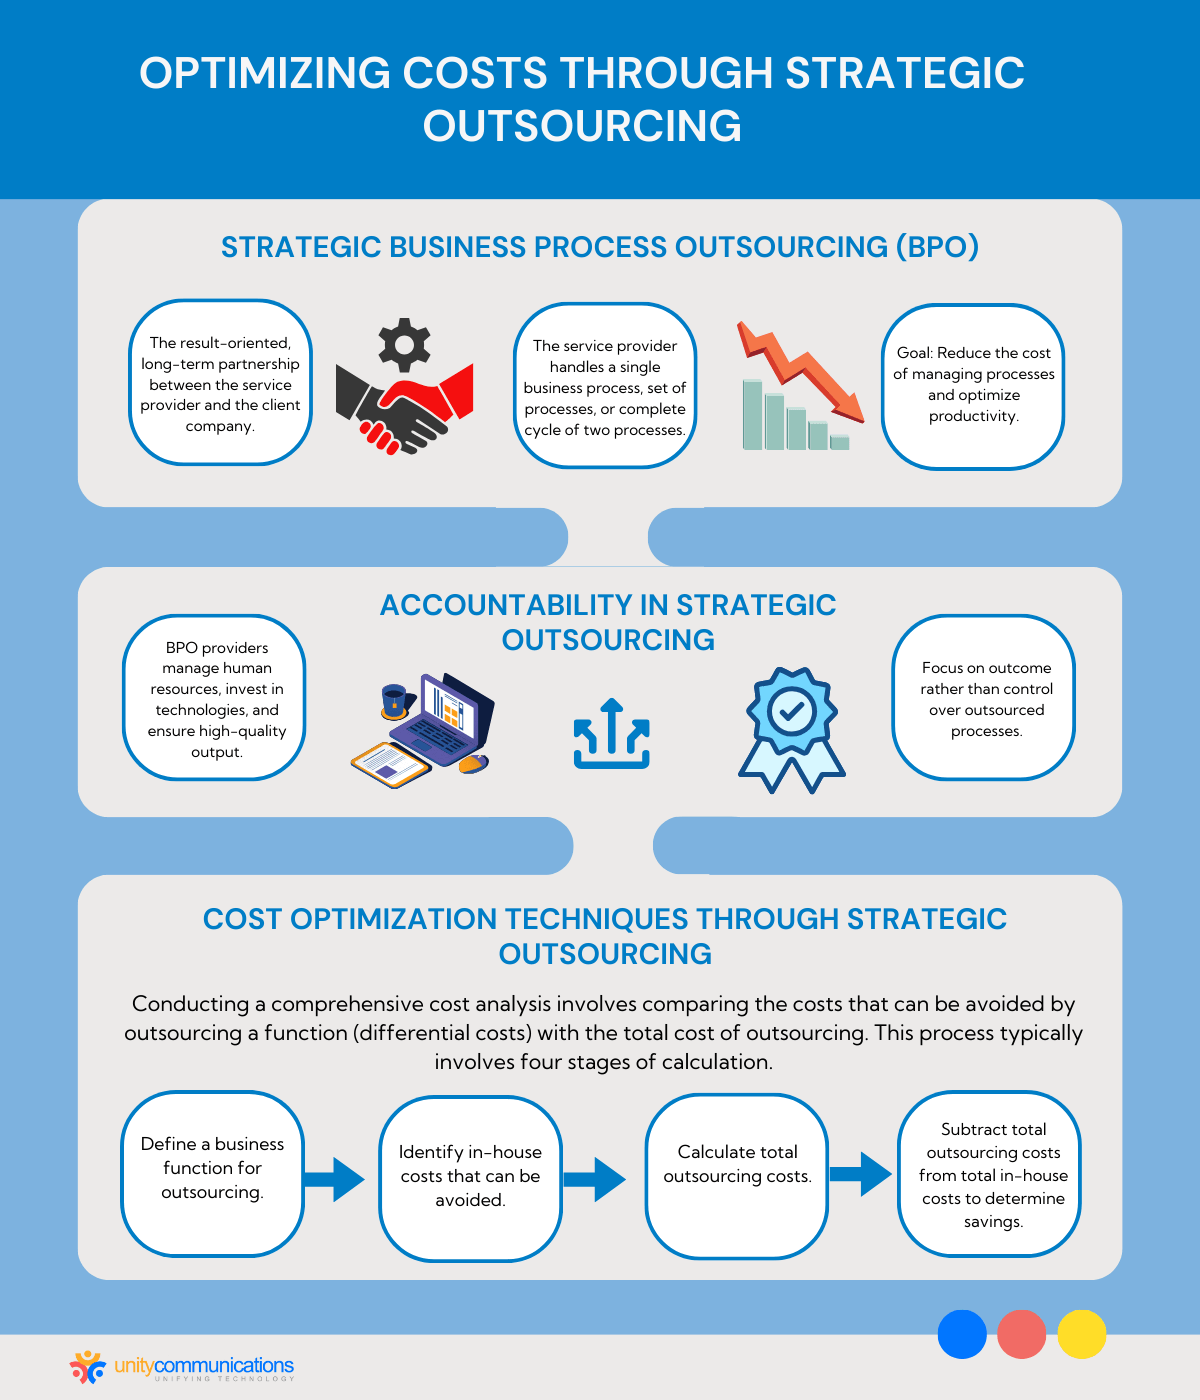 Optimizing Costs Through Strategic Outsourcing